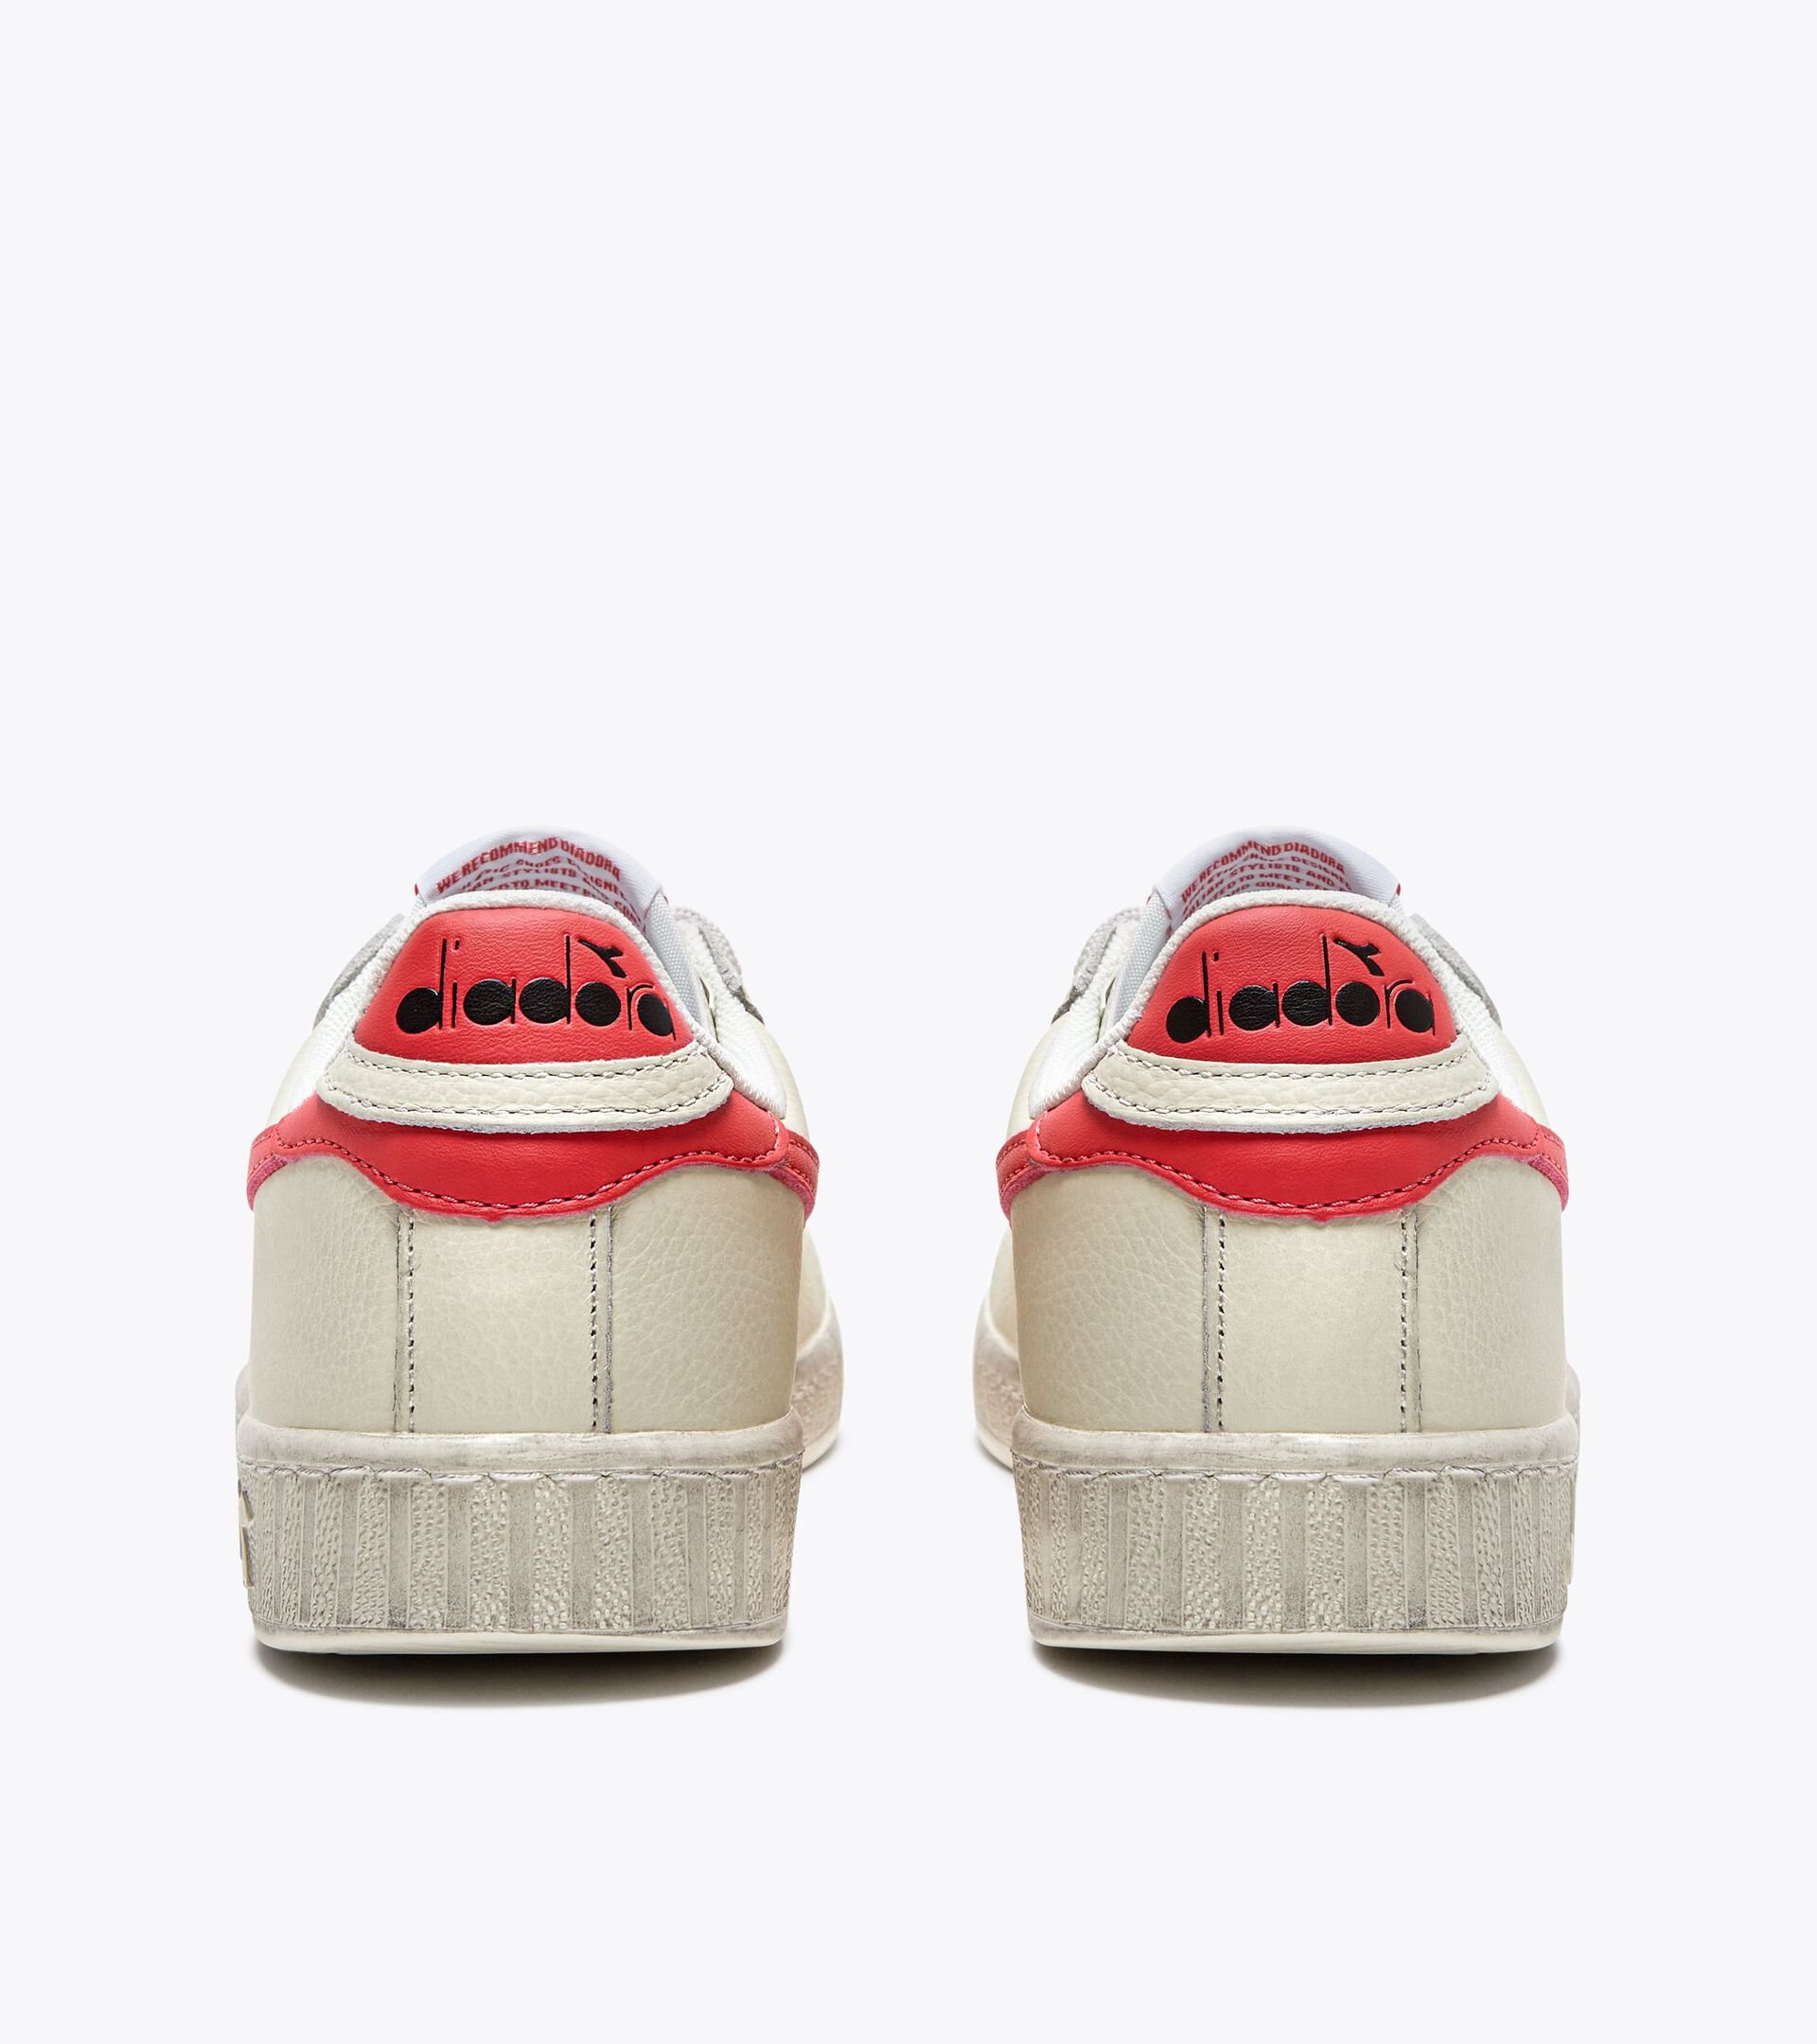 Sporty sneakers - Gender neutral GAME L LOW FLUO WAXED SUPER WHITE /HOT CORAL - Diadora